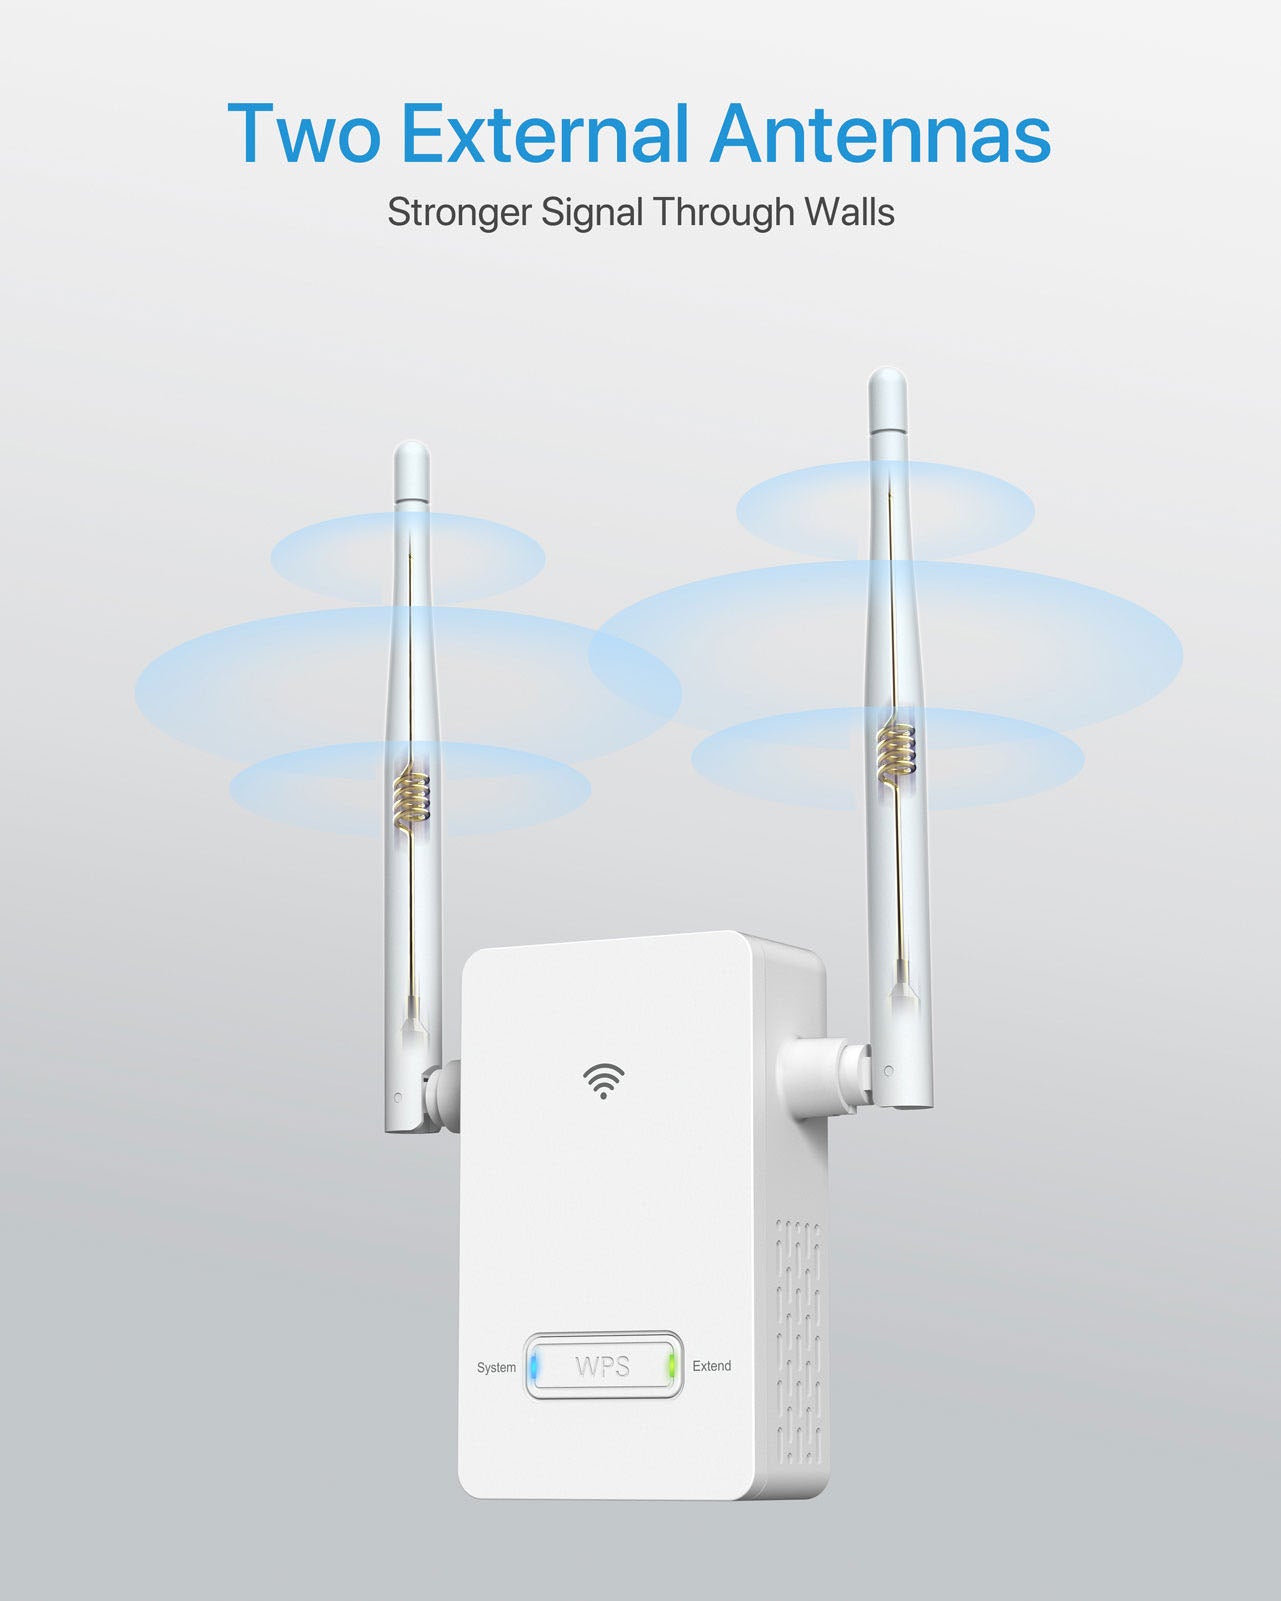 WiFi to Ethernet Adapter Wireless Bridge Receives Stronger Signal from Home WiFi Router with External High Gain Antennas